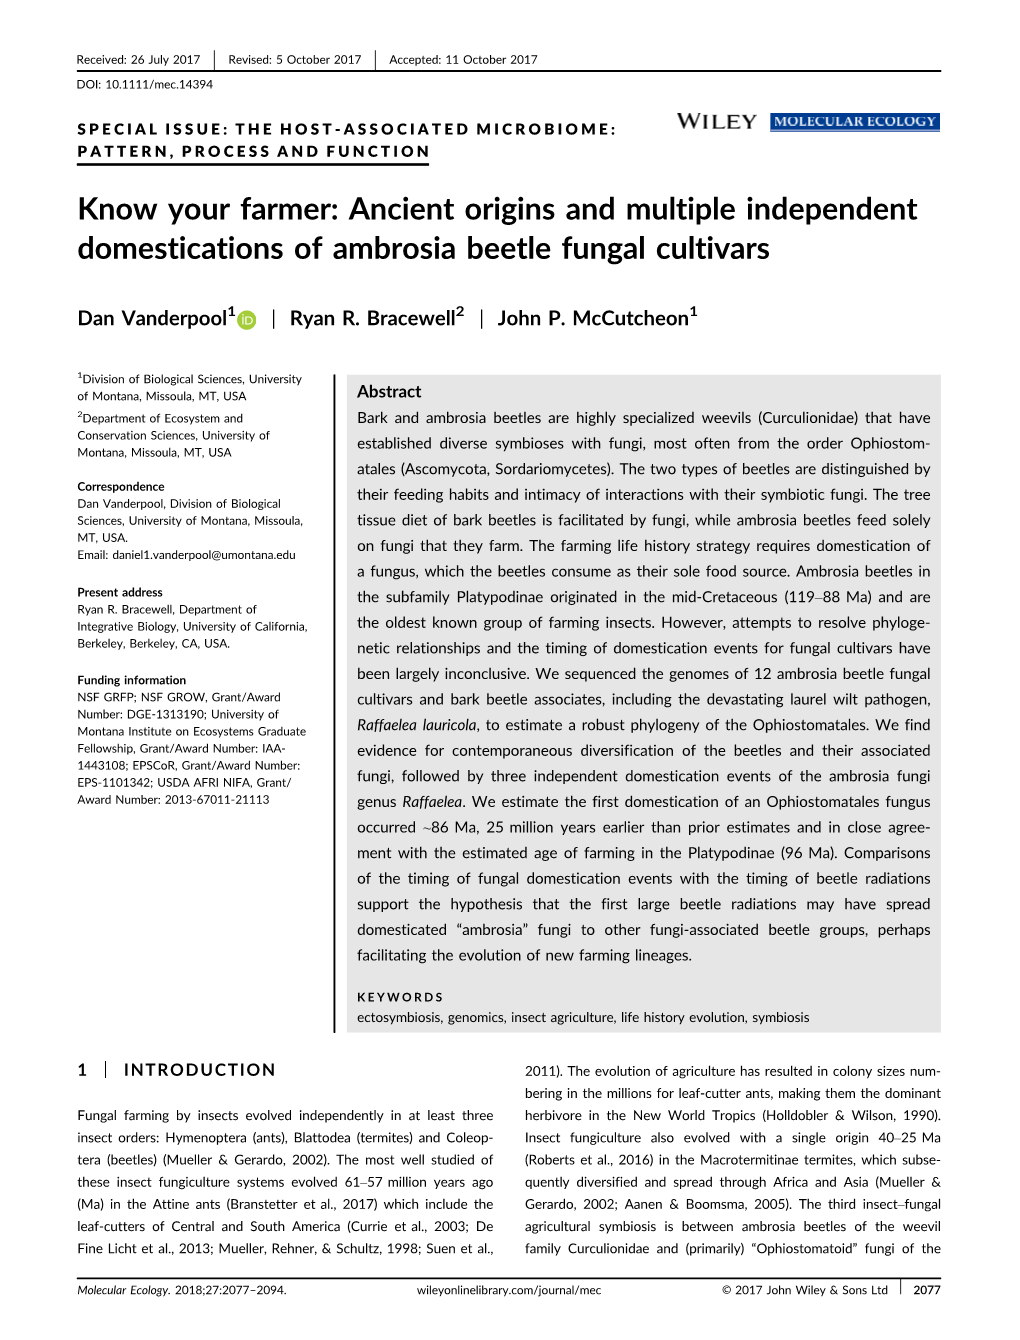 Know Your Farmer: Ancient Origins and Multiple Independent Domestications of Ambrosia Beetle Fungal Cultivars